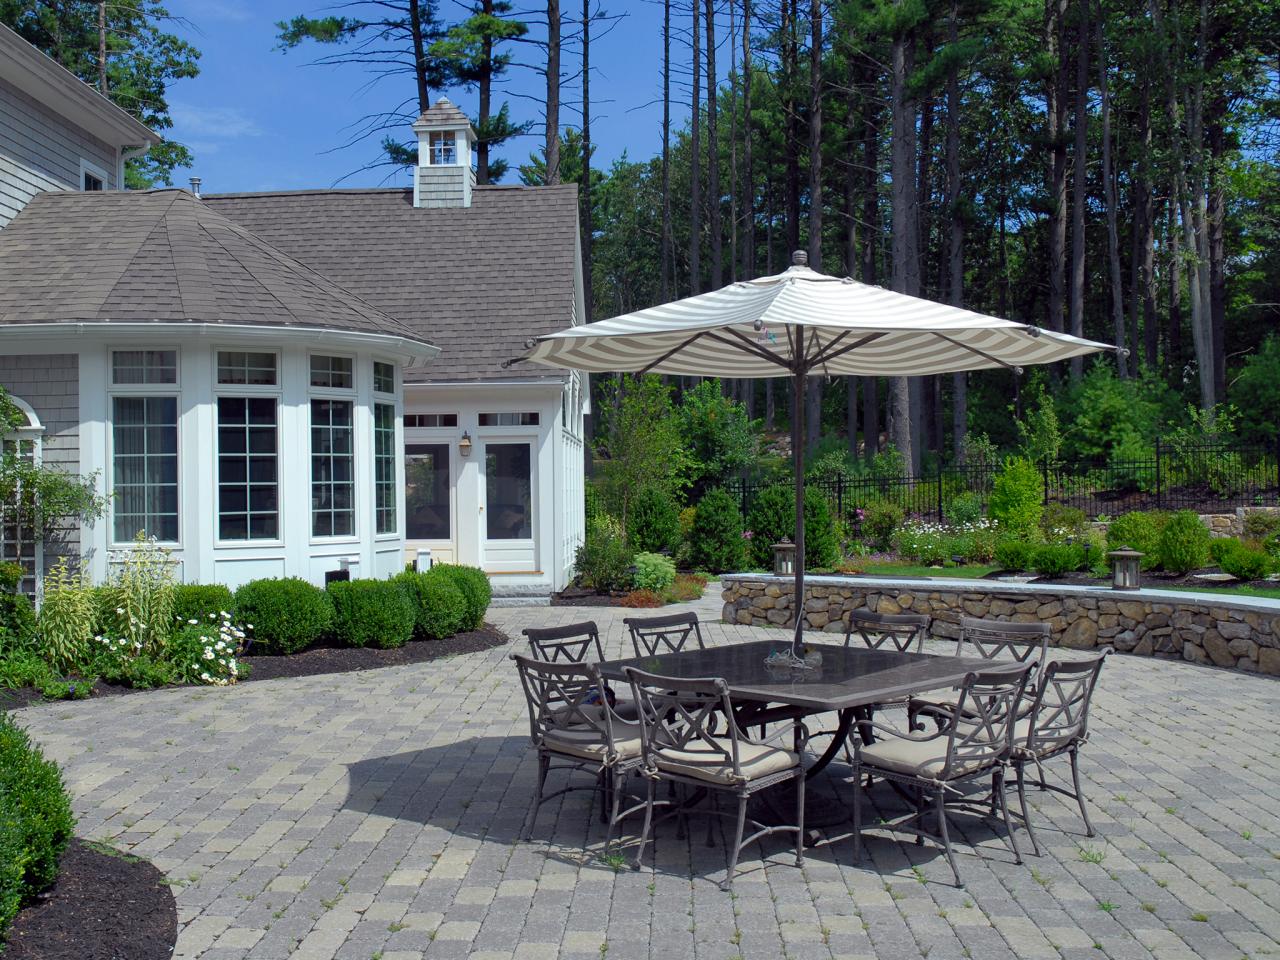 Paver Patios, Images Of Patios With Pavers